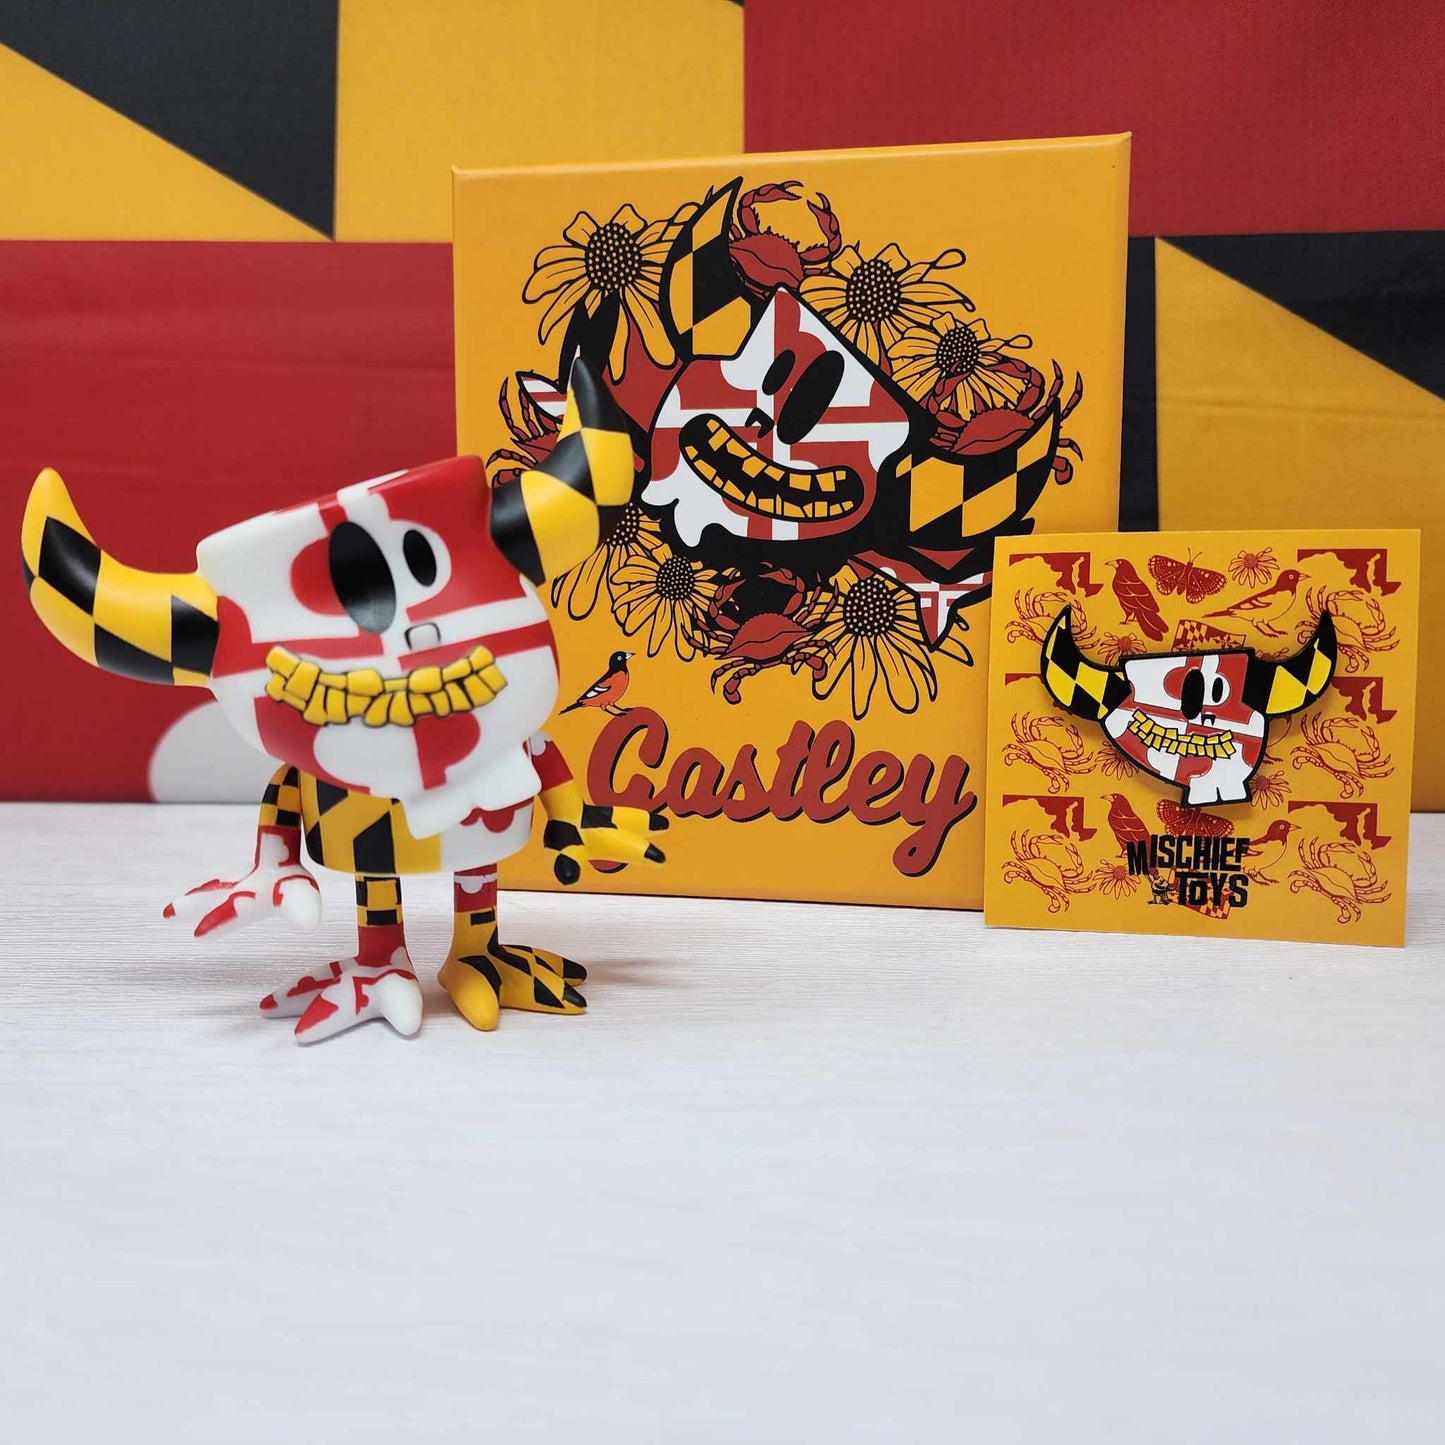 Maryland Gastley / Mischief Toys by Route One Apparel